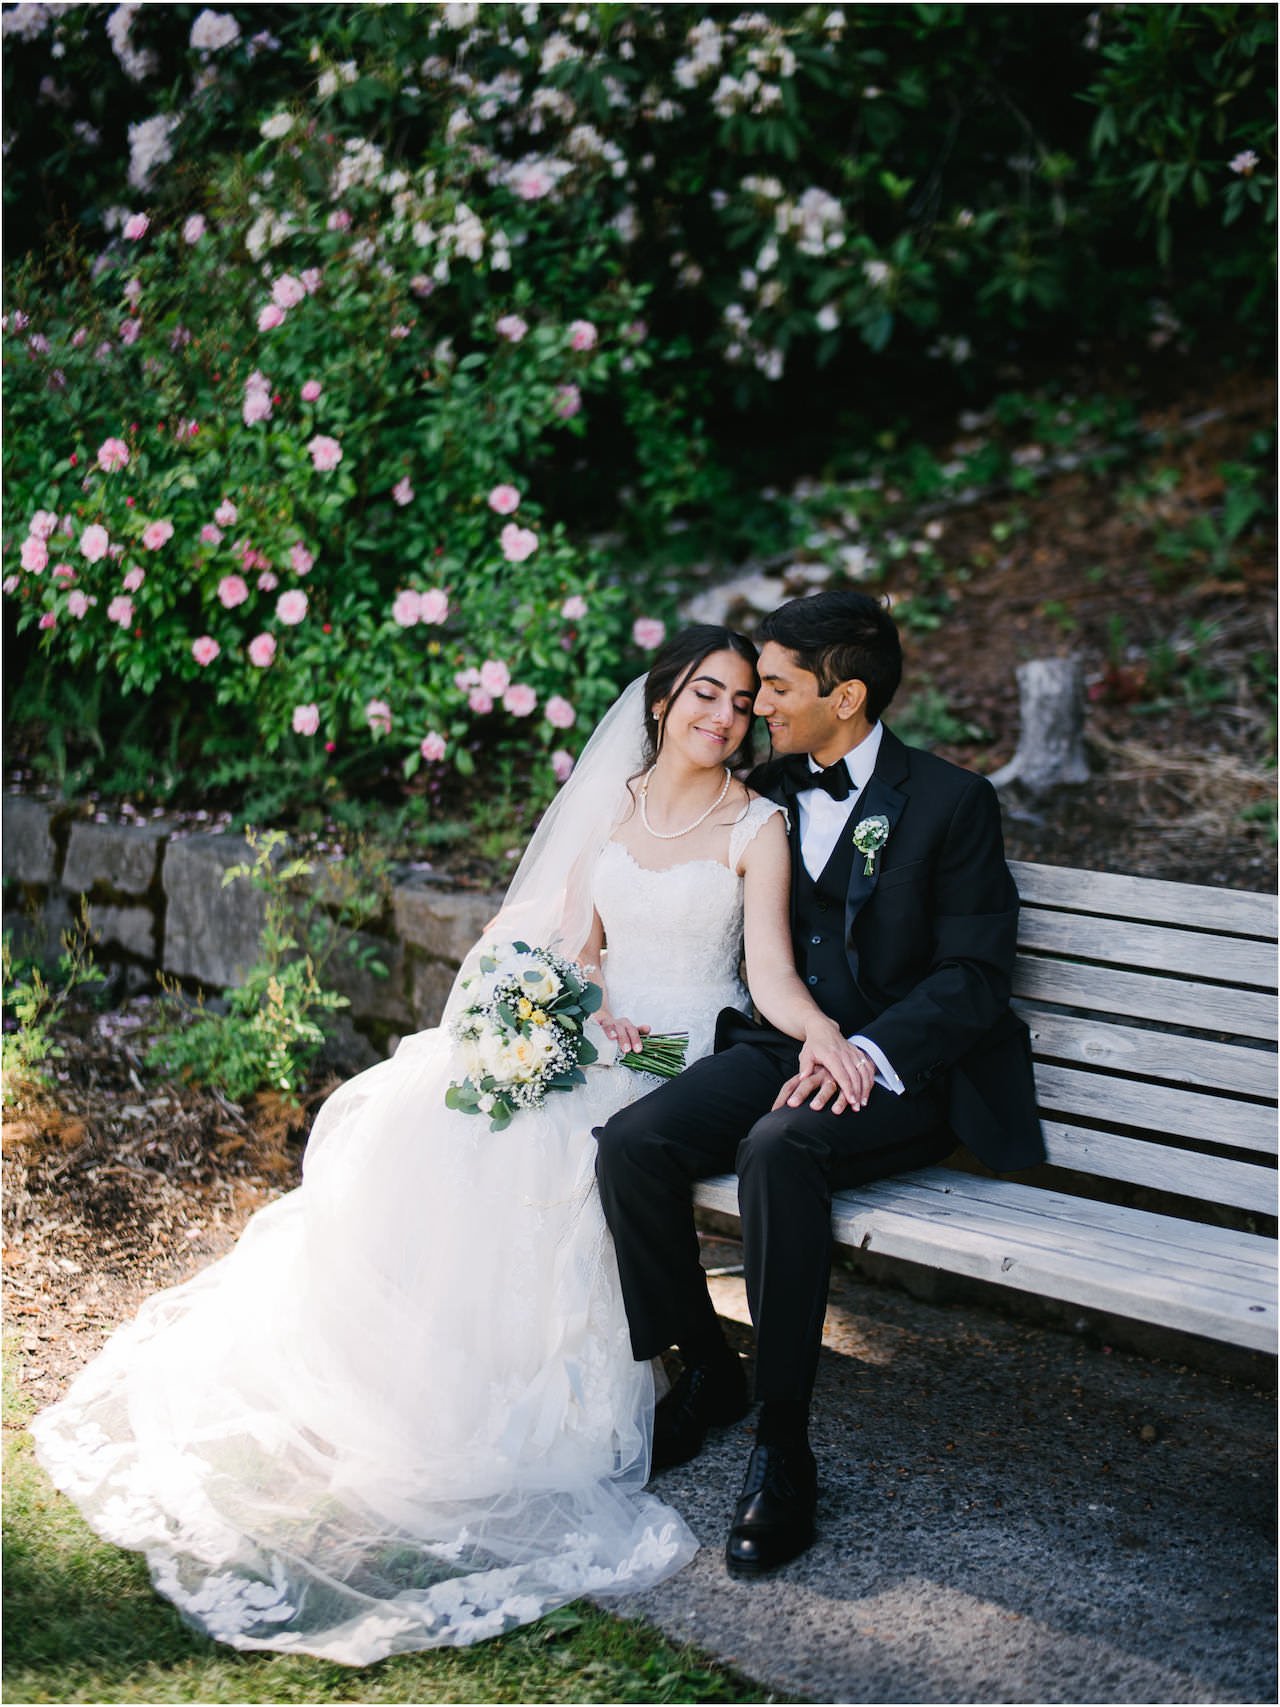  Bride and groom in tux sit on bench in rose test garden 